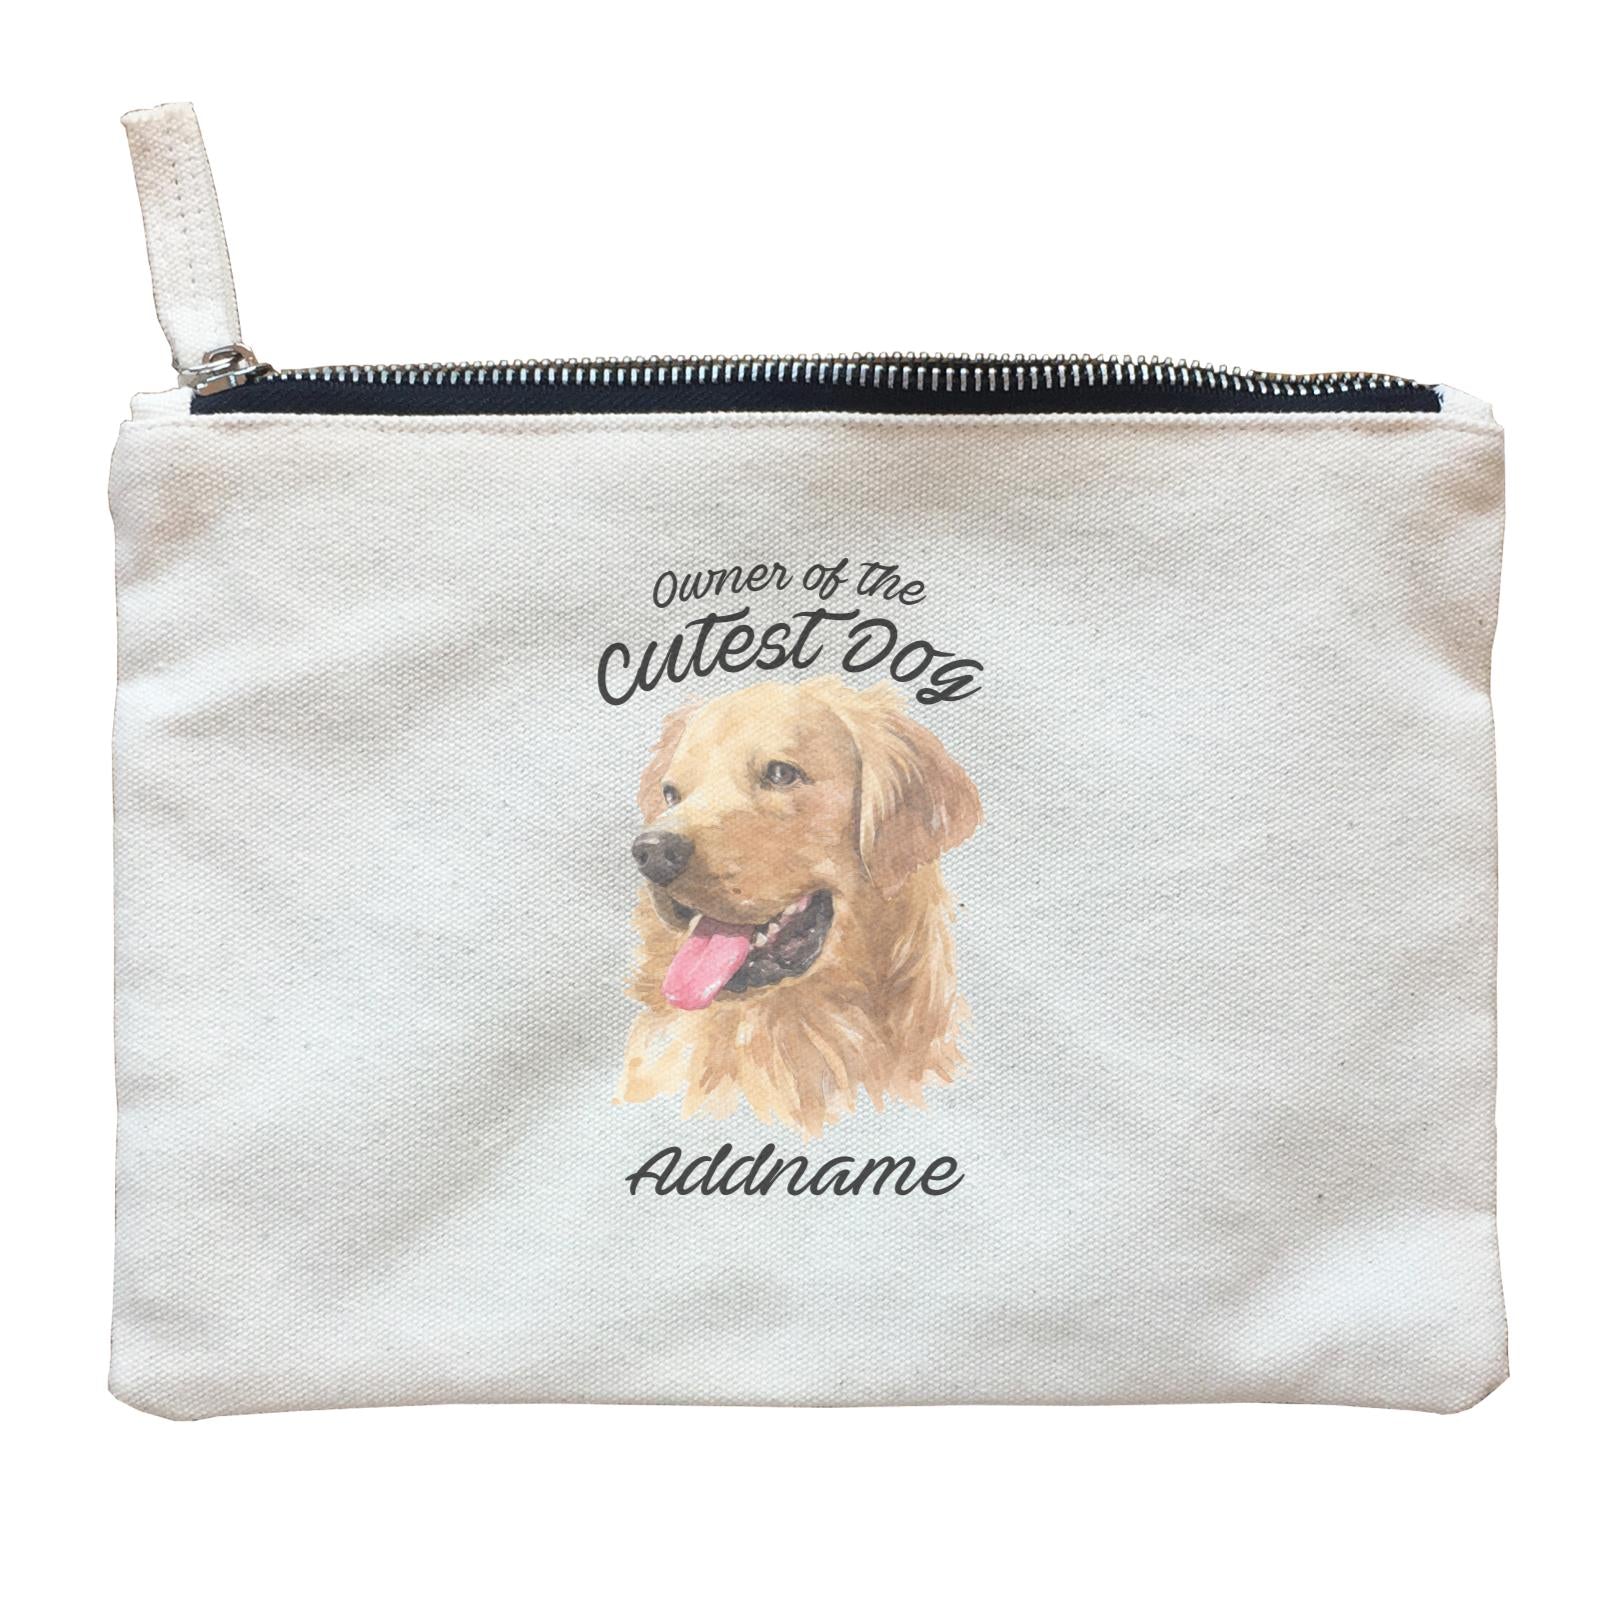 Watercolor Dog Owner Of The Cutest Dog Golden Retriever Left Addname Zipper Pouch